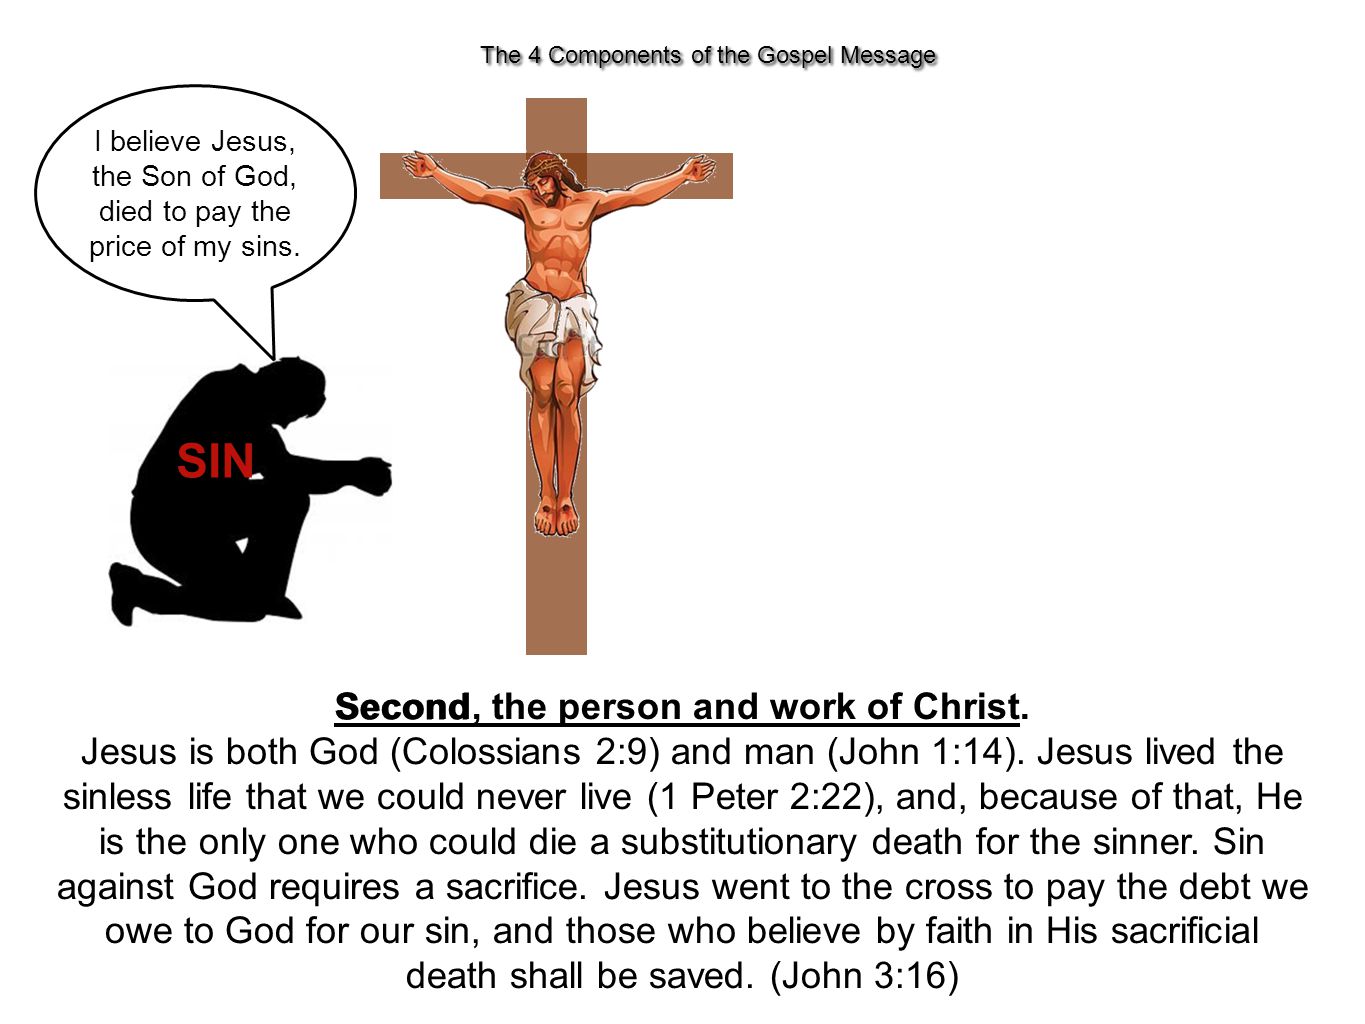 SIN Second, the person and work of Christ. Jesus is both God (Colossians 2:9) and man (John 1:14).